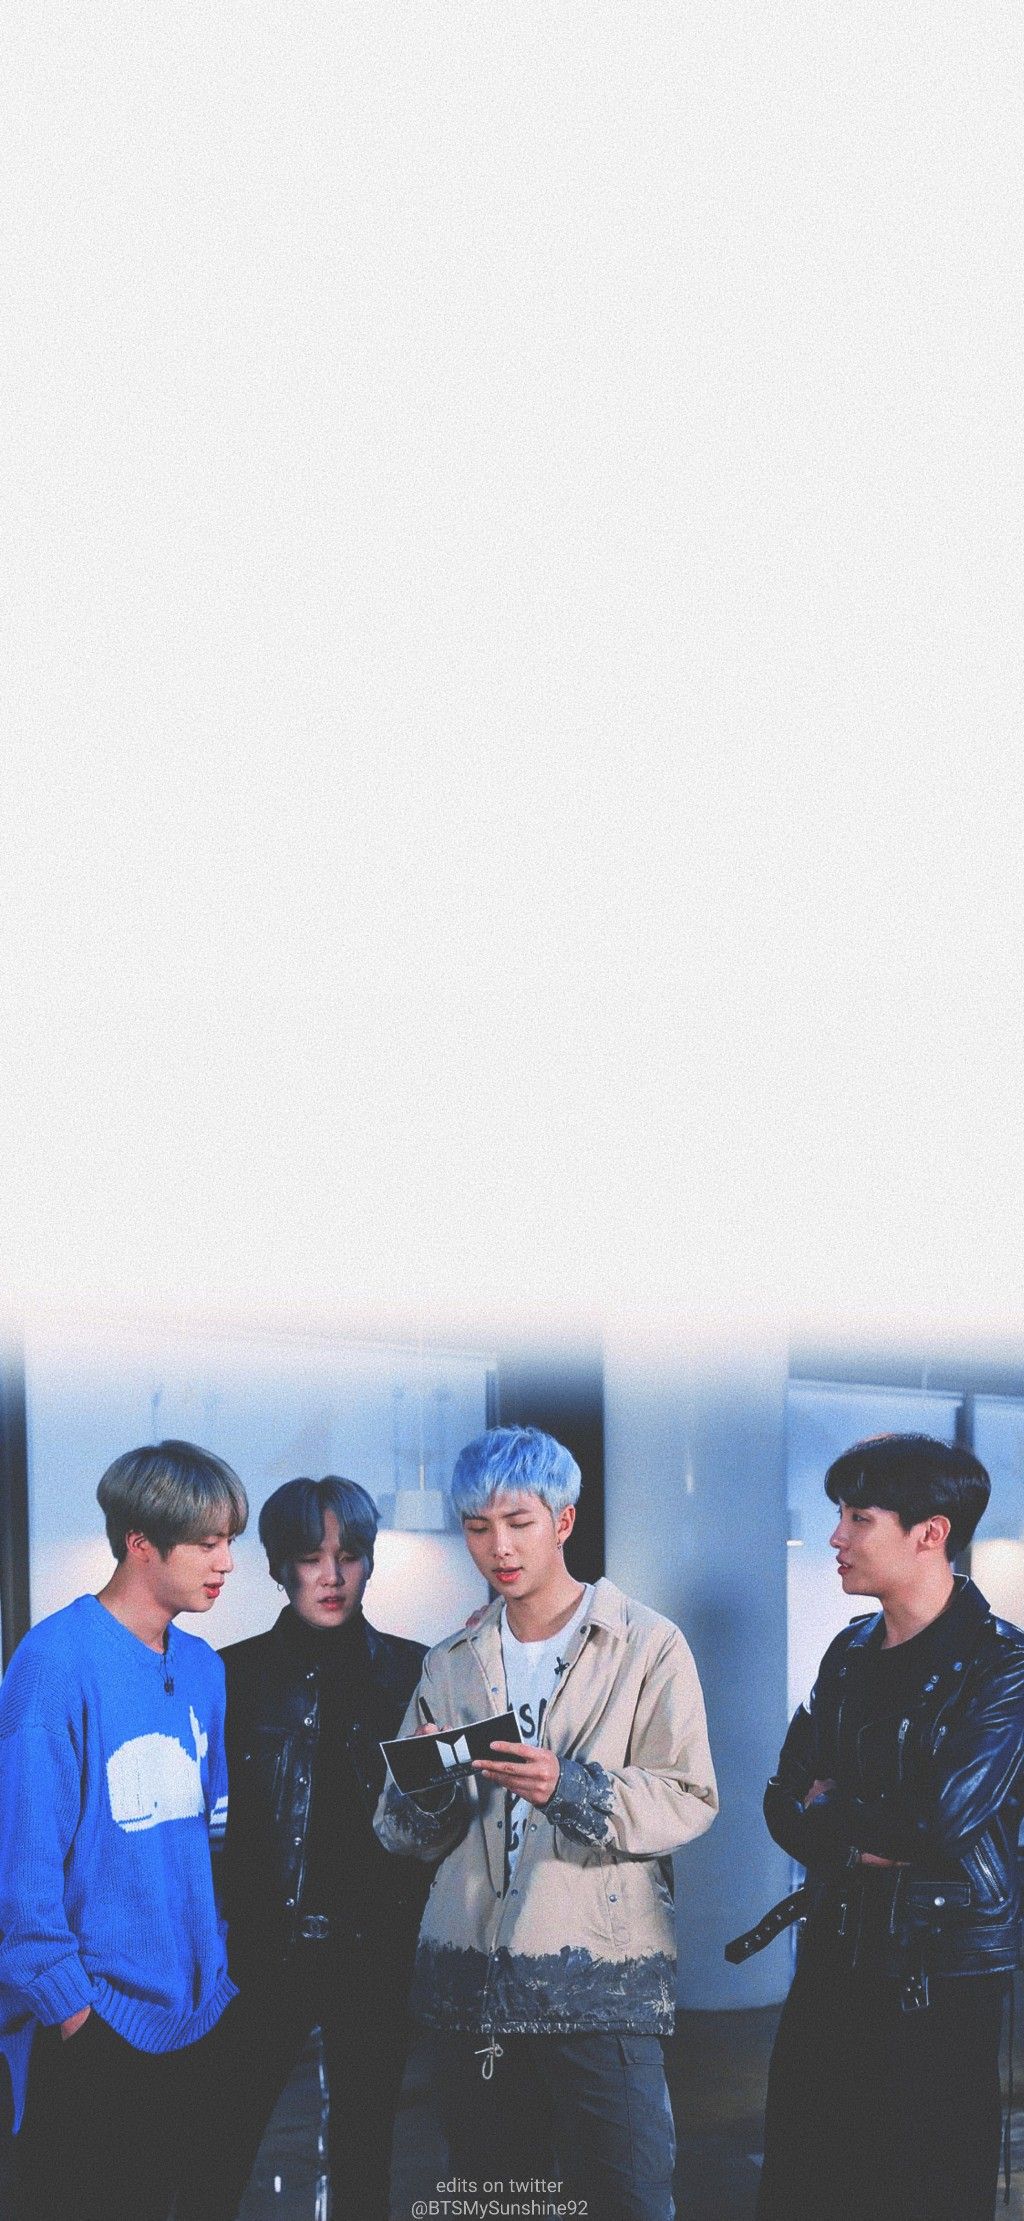 Hyung Line Bts Wallpapers